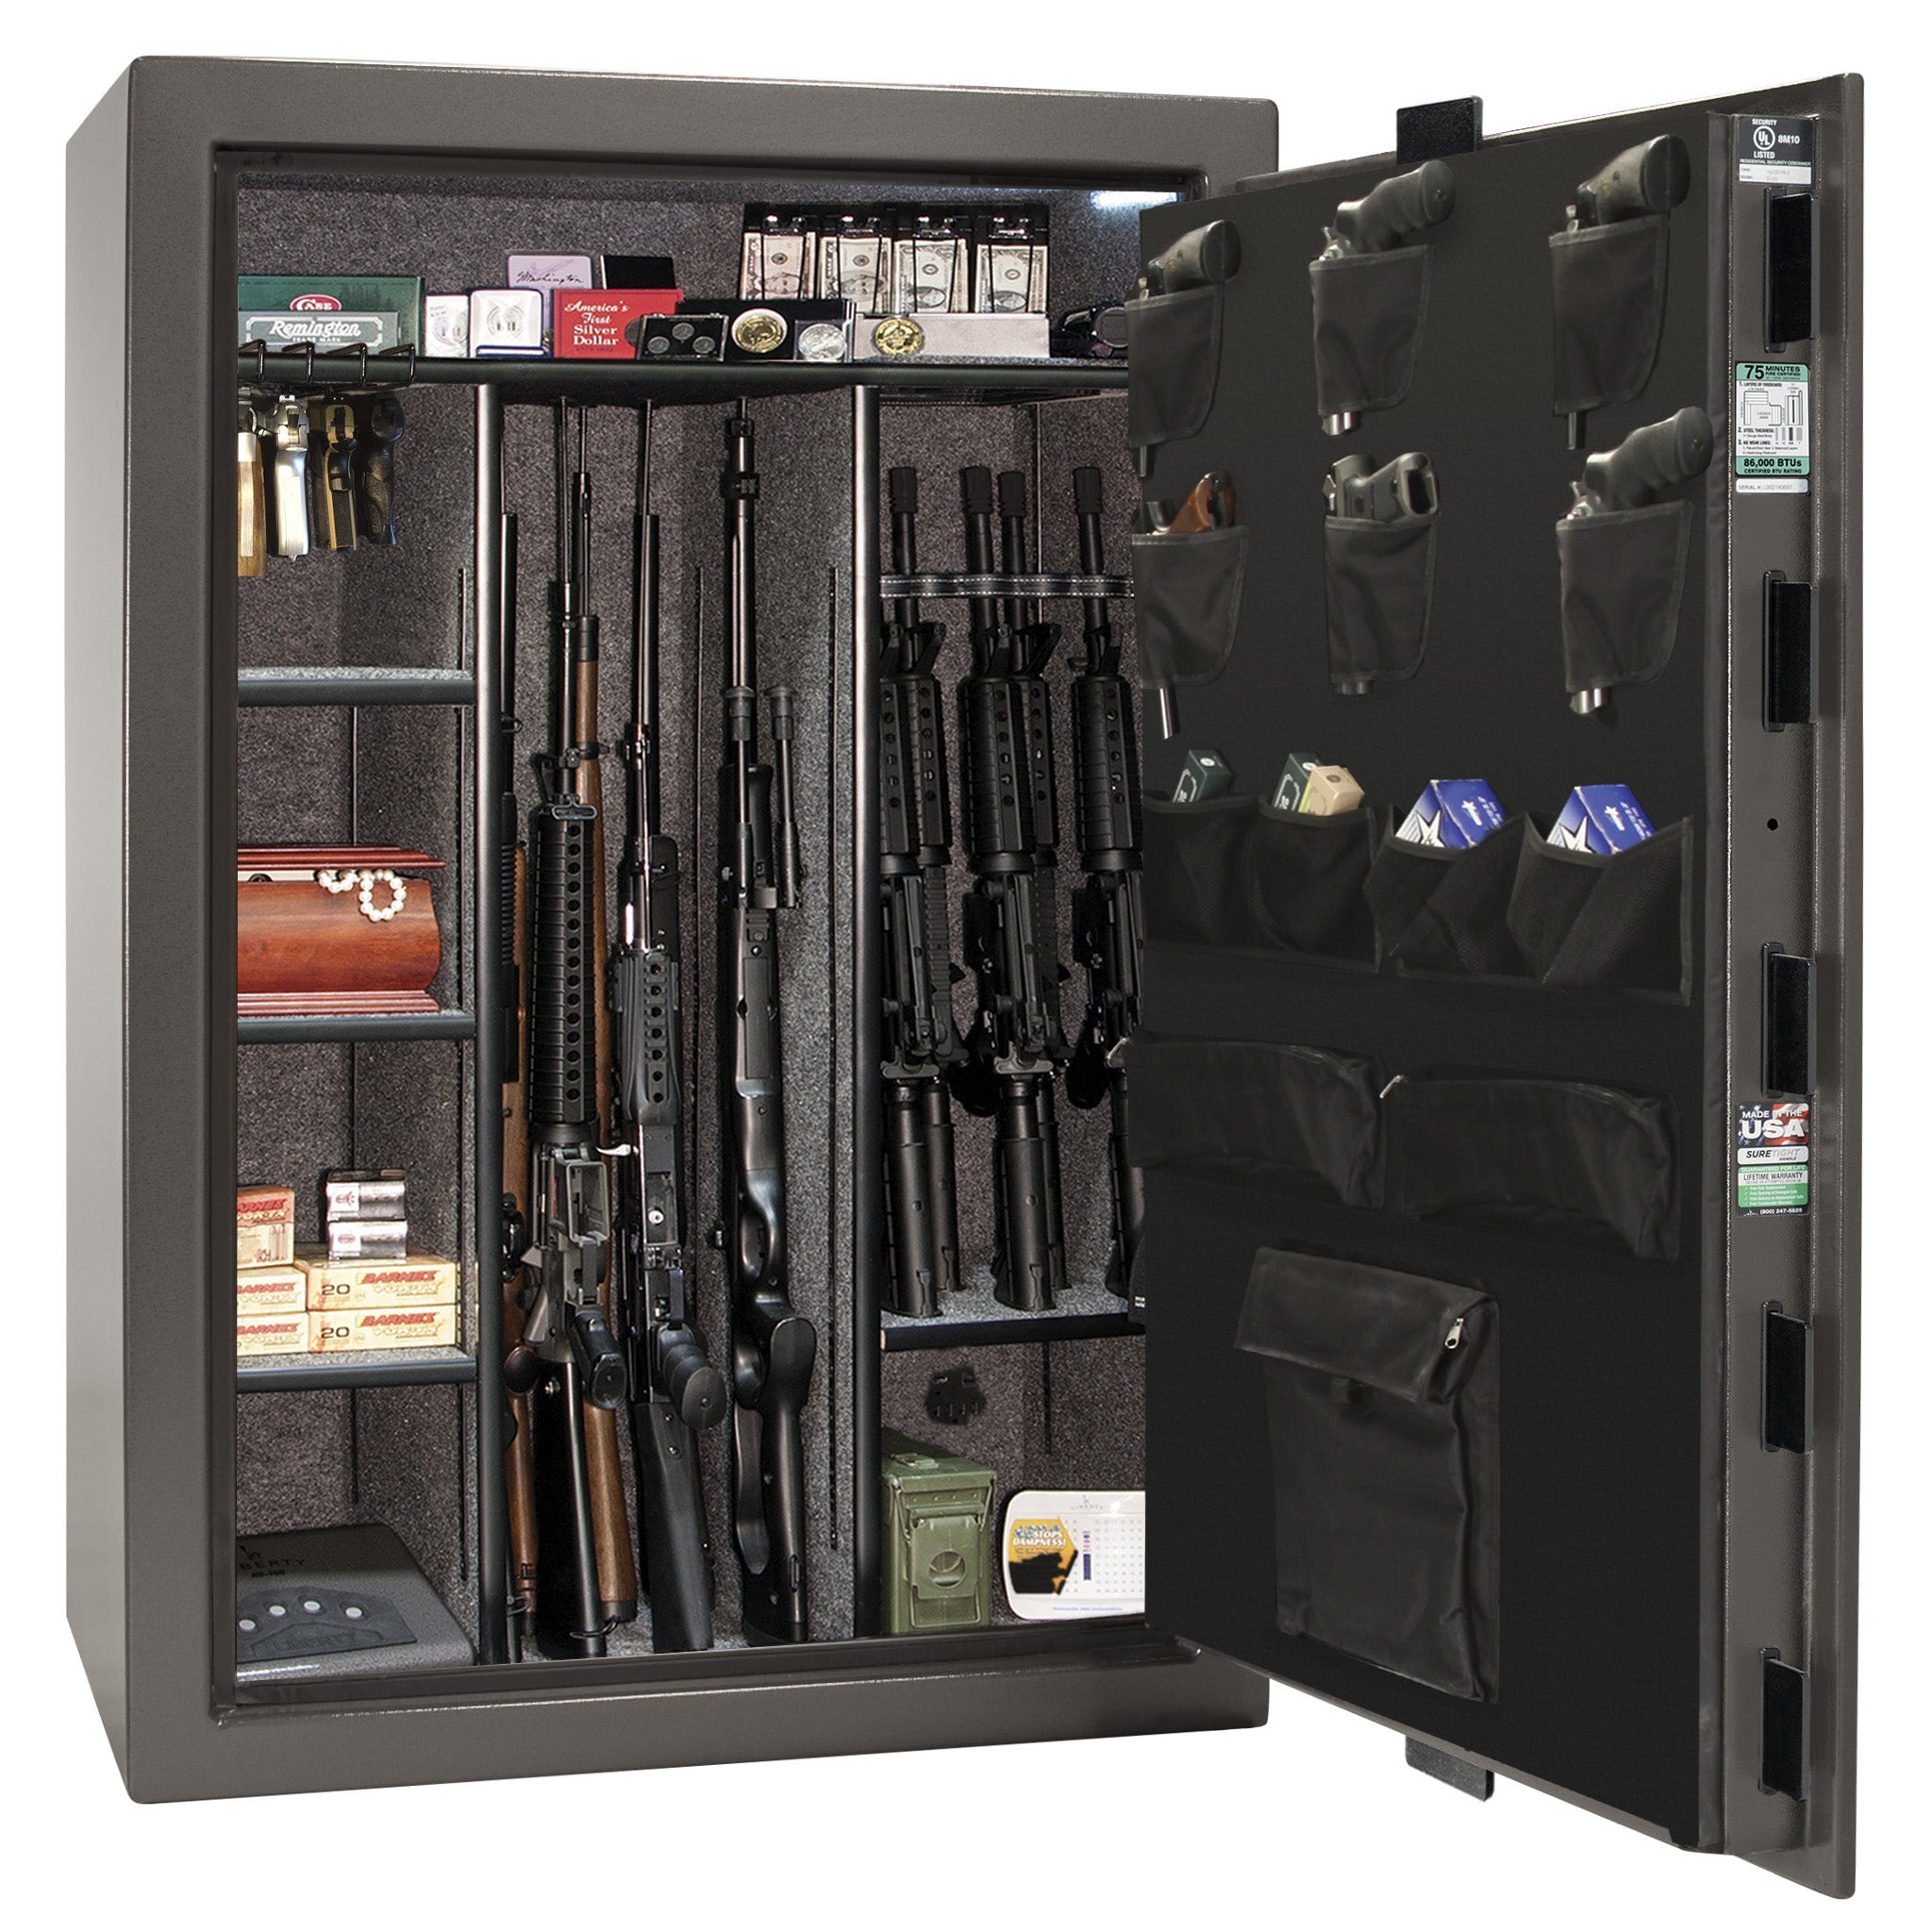 Fatboy Jr. Series | 48XT | Level 4 Security | 75 Minute Fire Protection | Dimensions: 60.5"(H) x 42"(W) x 22"(D) | Up to 48 Long Guns | Gray Marble | Mechanical Lock